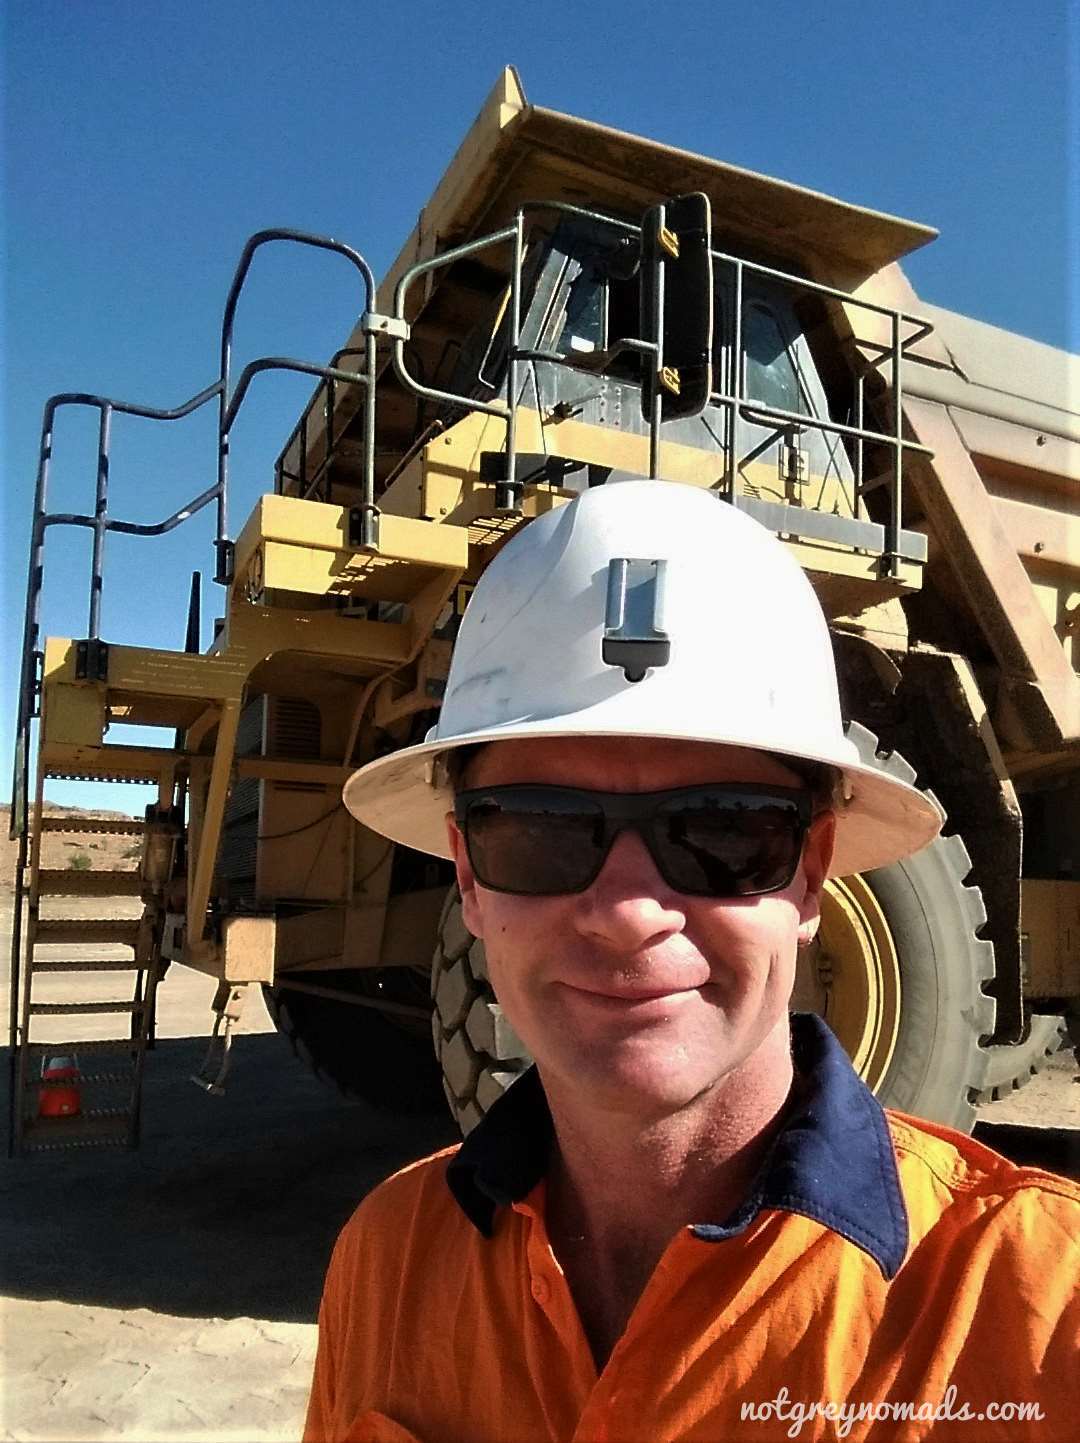 Crispy at work in the mine while travelling around Australia